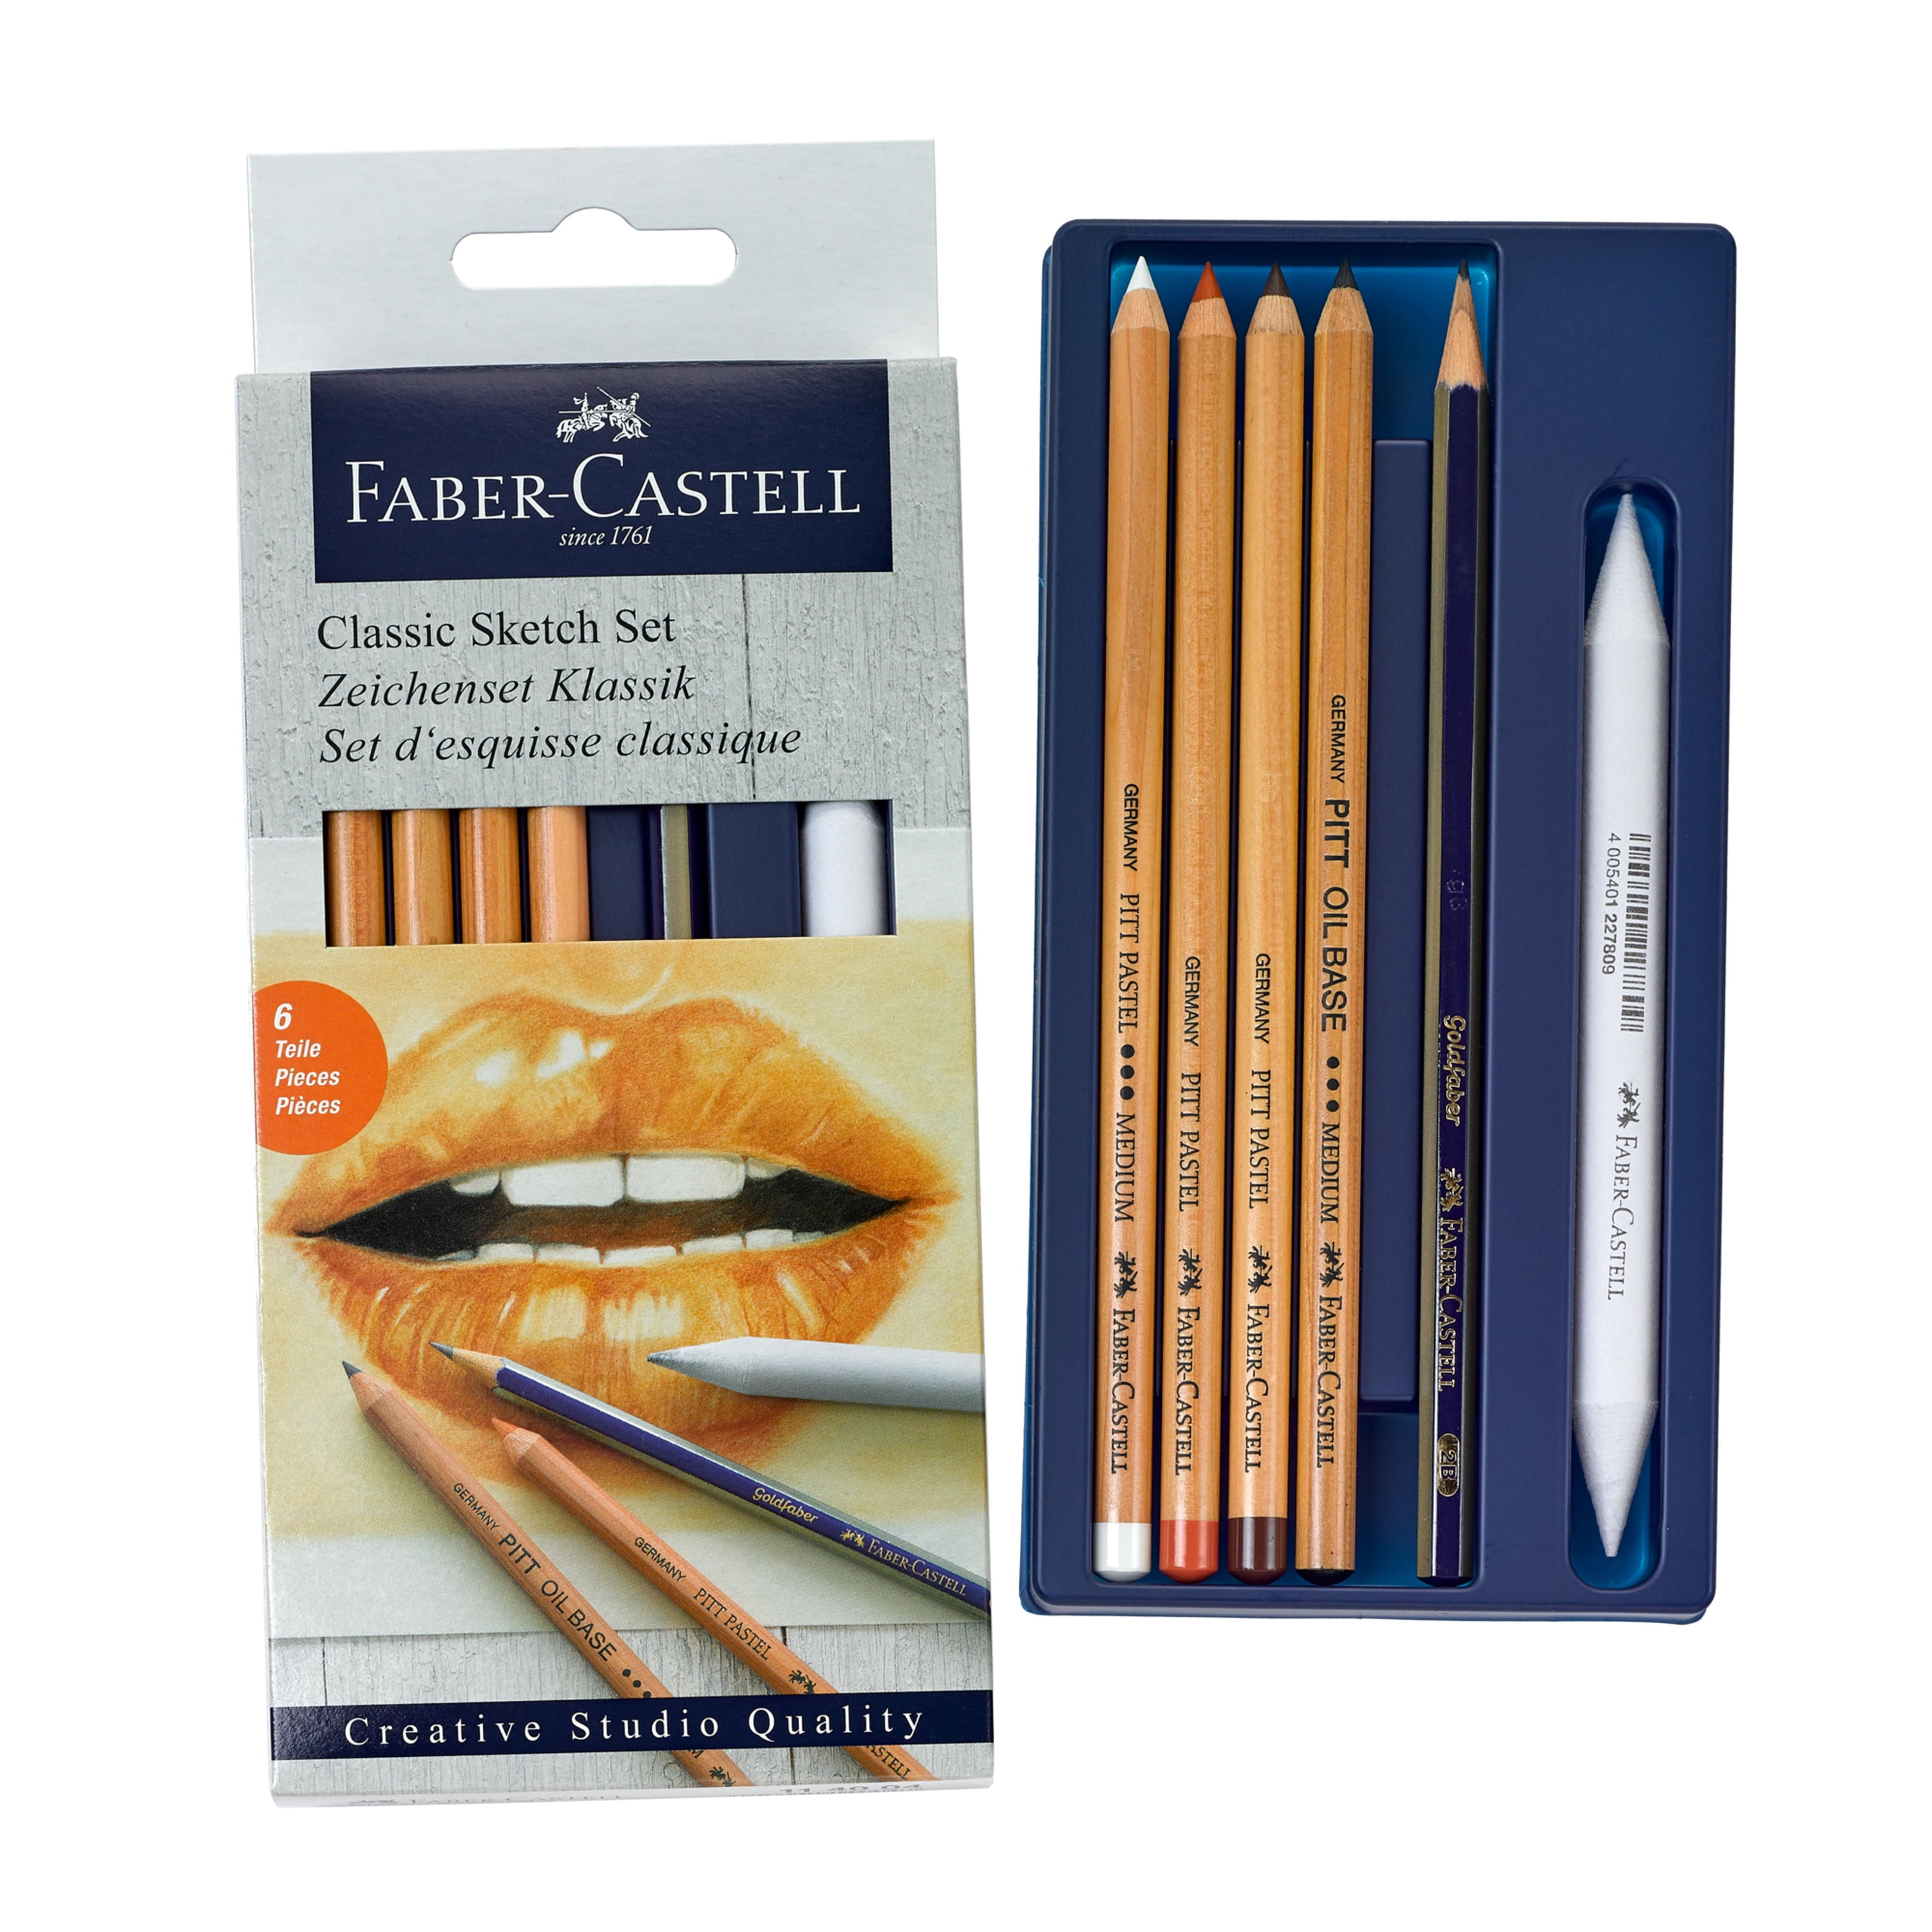  Faber-Castell Pencils, Castell 9000 Graphite art 2B pencils  for drawing, sketching - 12 Artist pencils : Arts, Crafts & Sewing